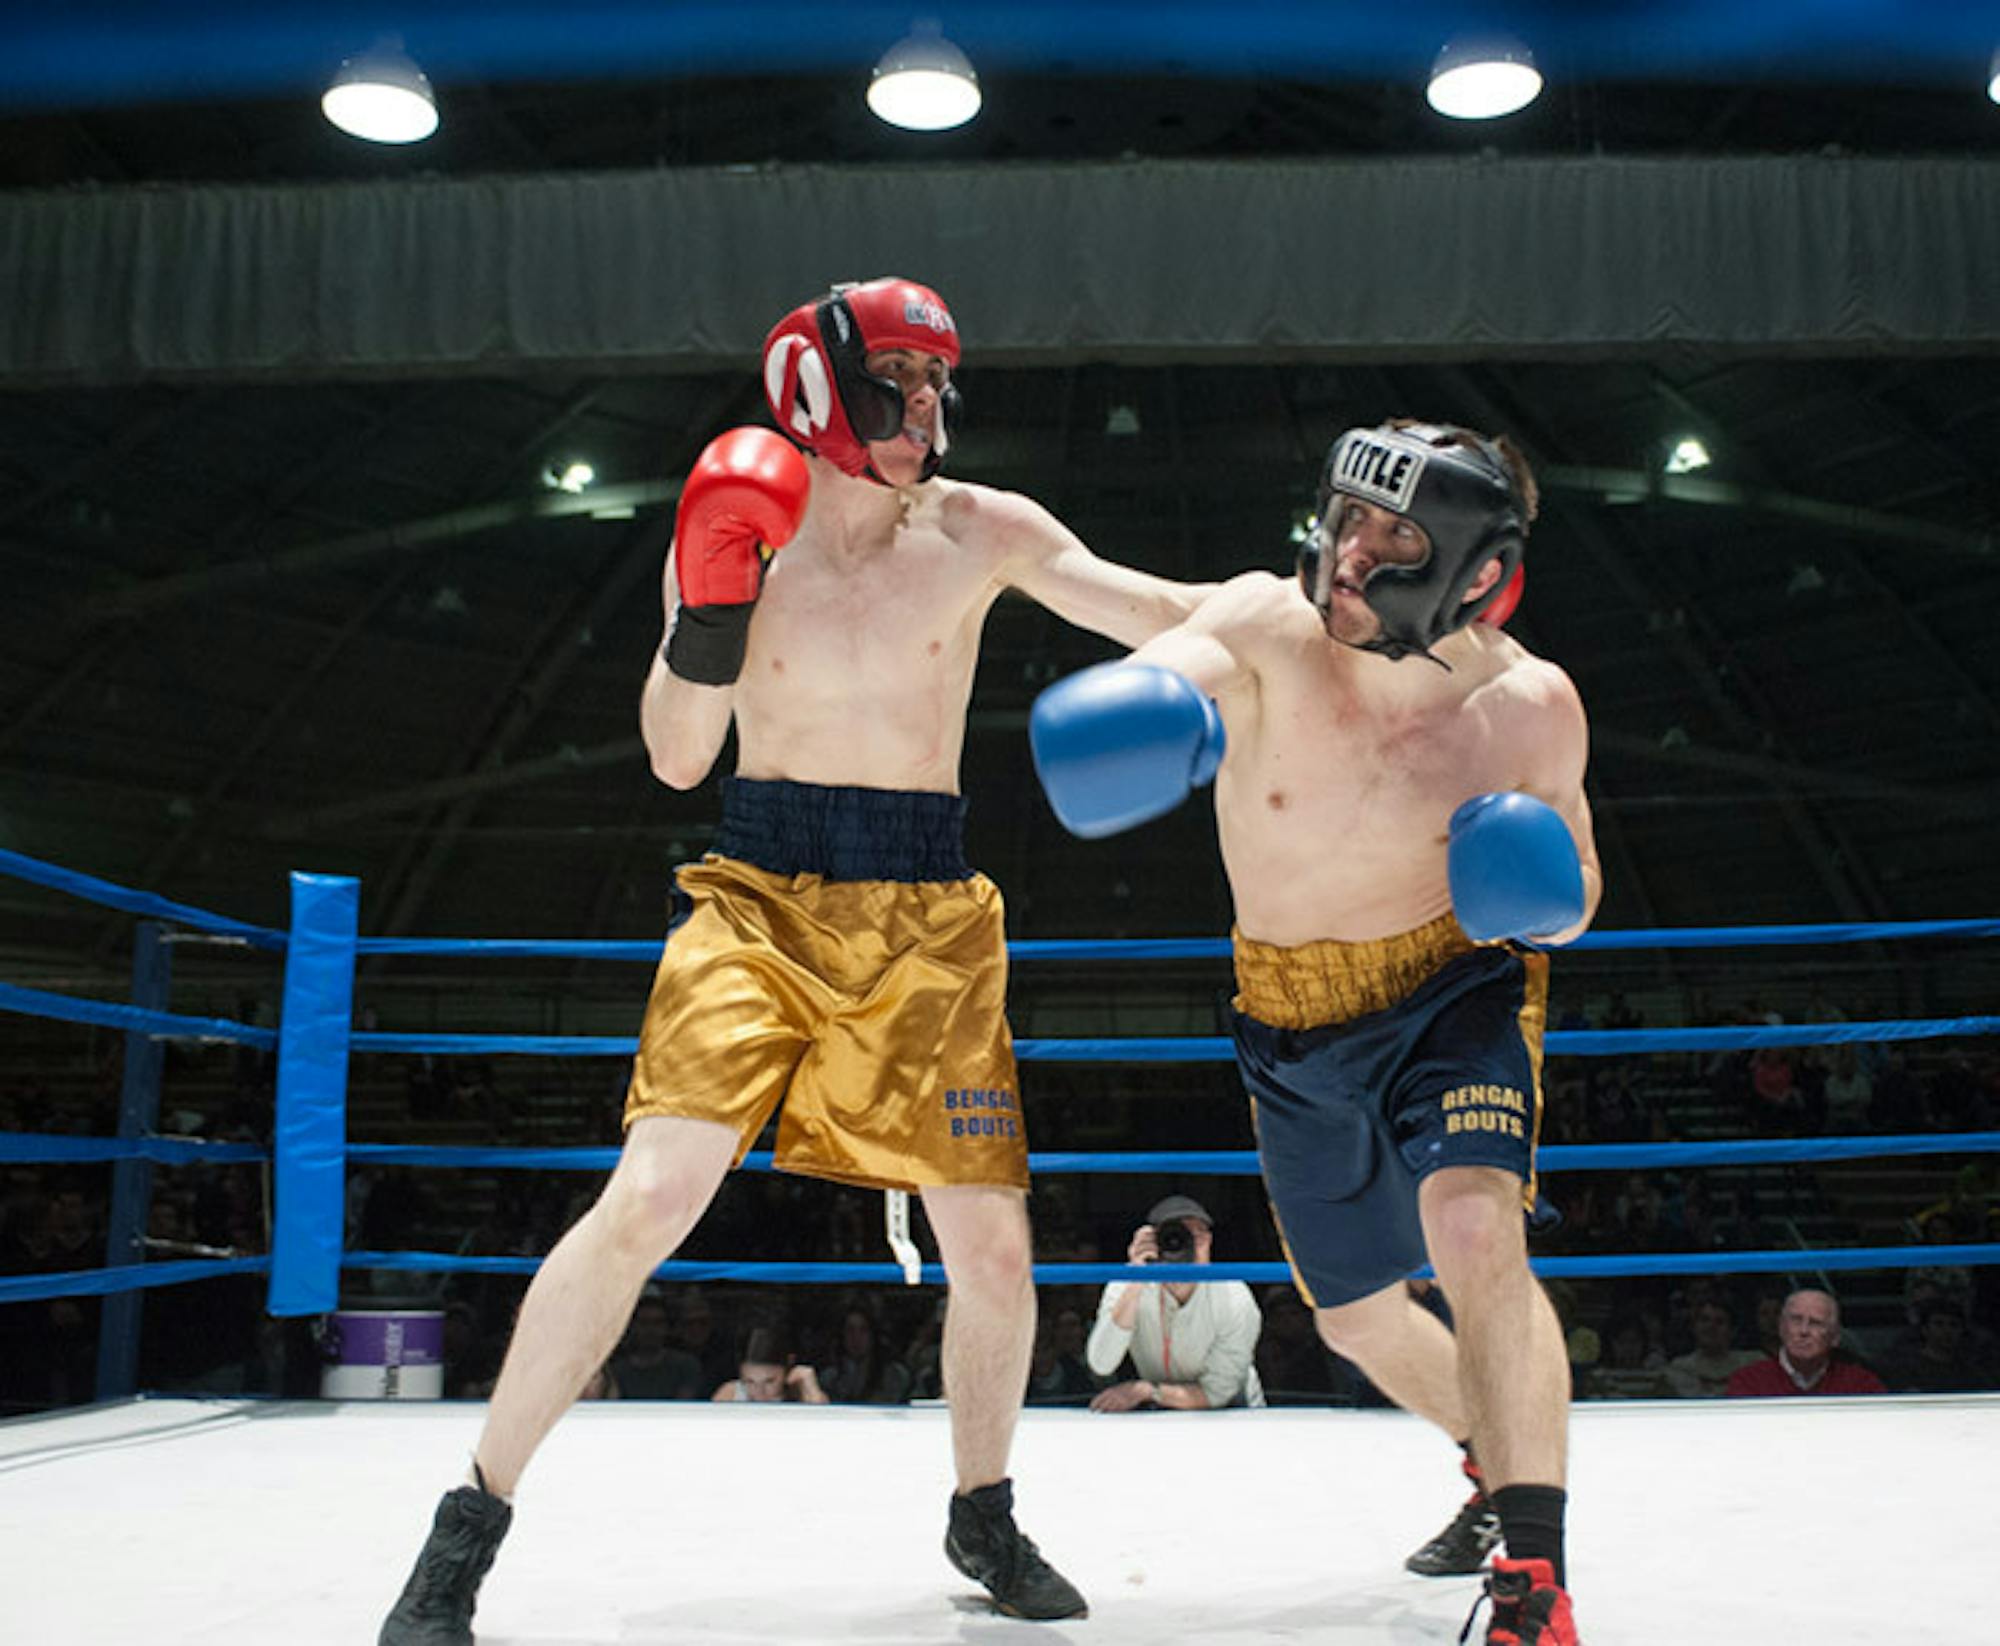 Senior captain Ben Eichler, right, dodges a big swing from sophomore Ryan Dunn during their semifinal bout Tuesday night. Eichler emerged victorious by a split decision.